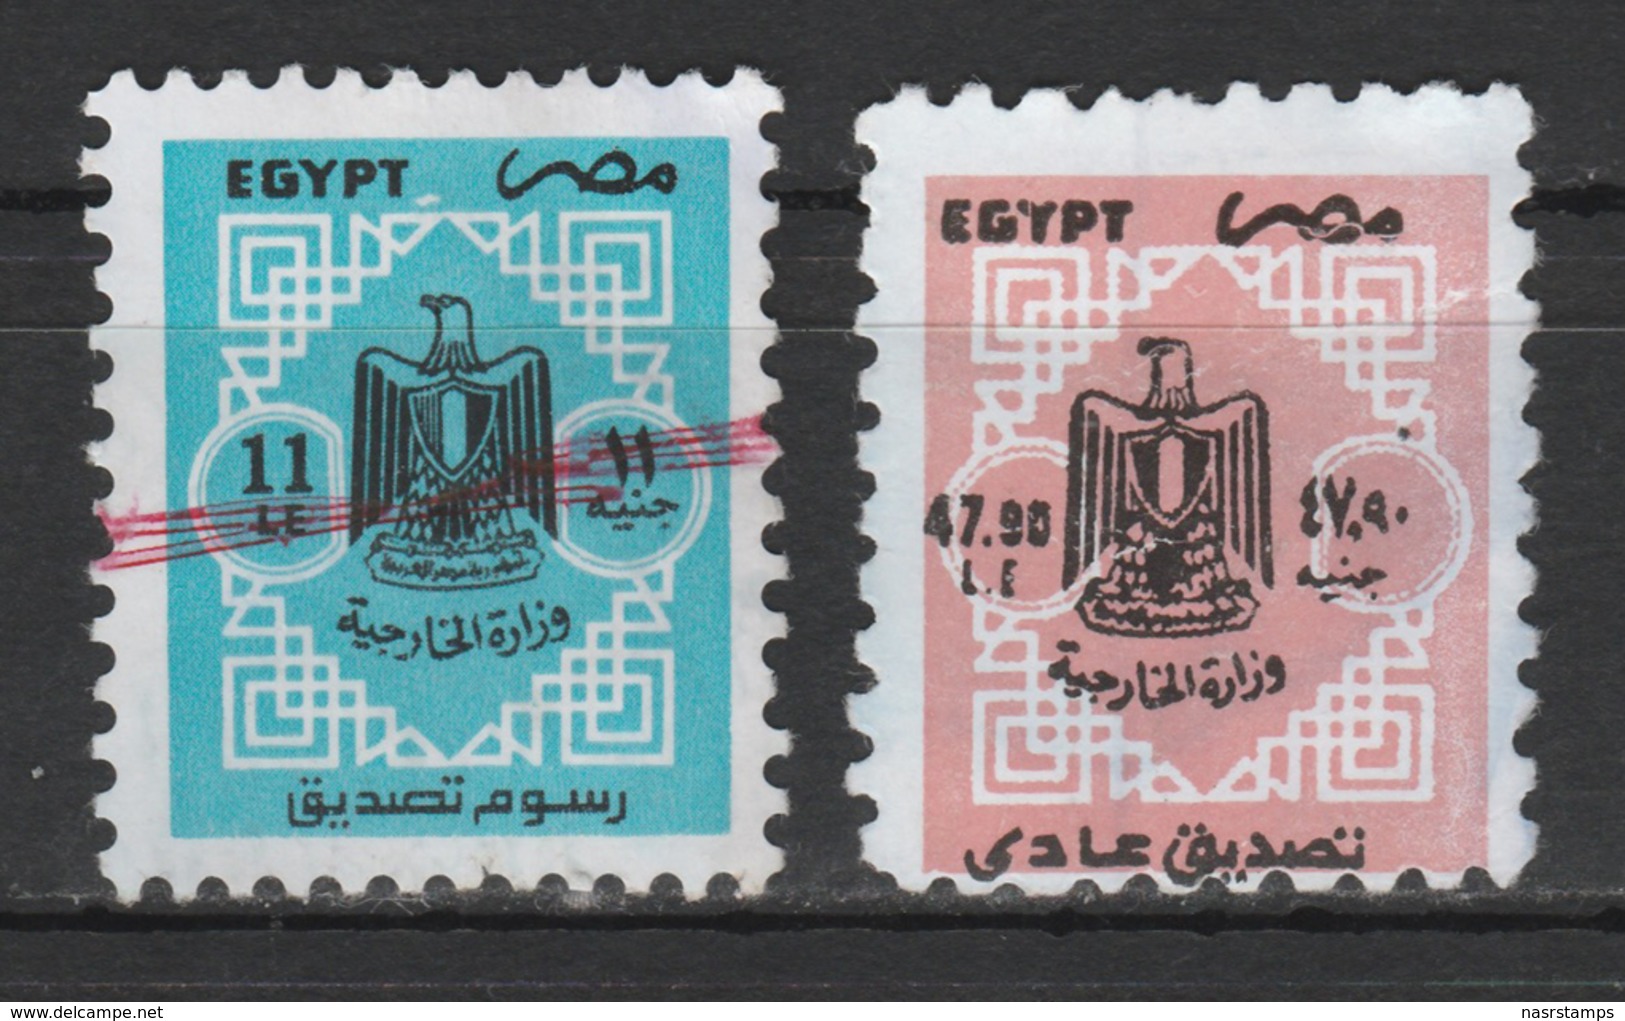 Egypt - Rare - ( Old Revenue - Ministry Of Foreign Affairs - 11 & 47.90 EGP ) Used - Gebraucht